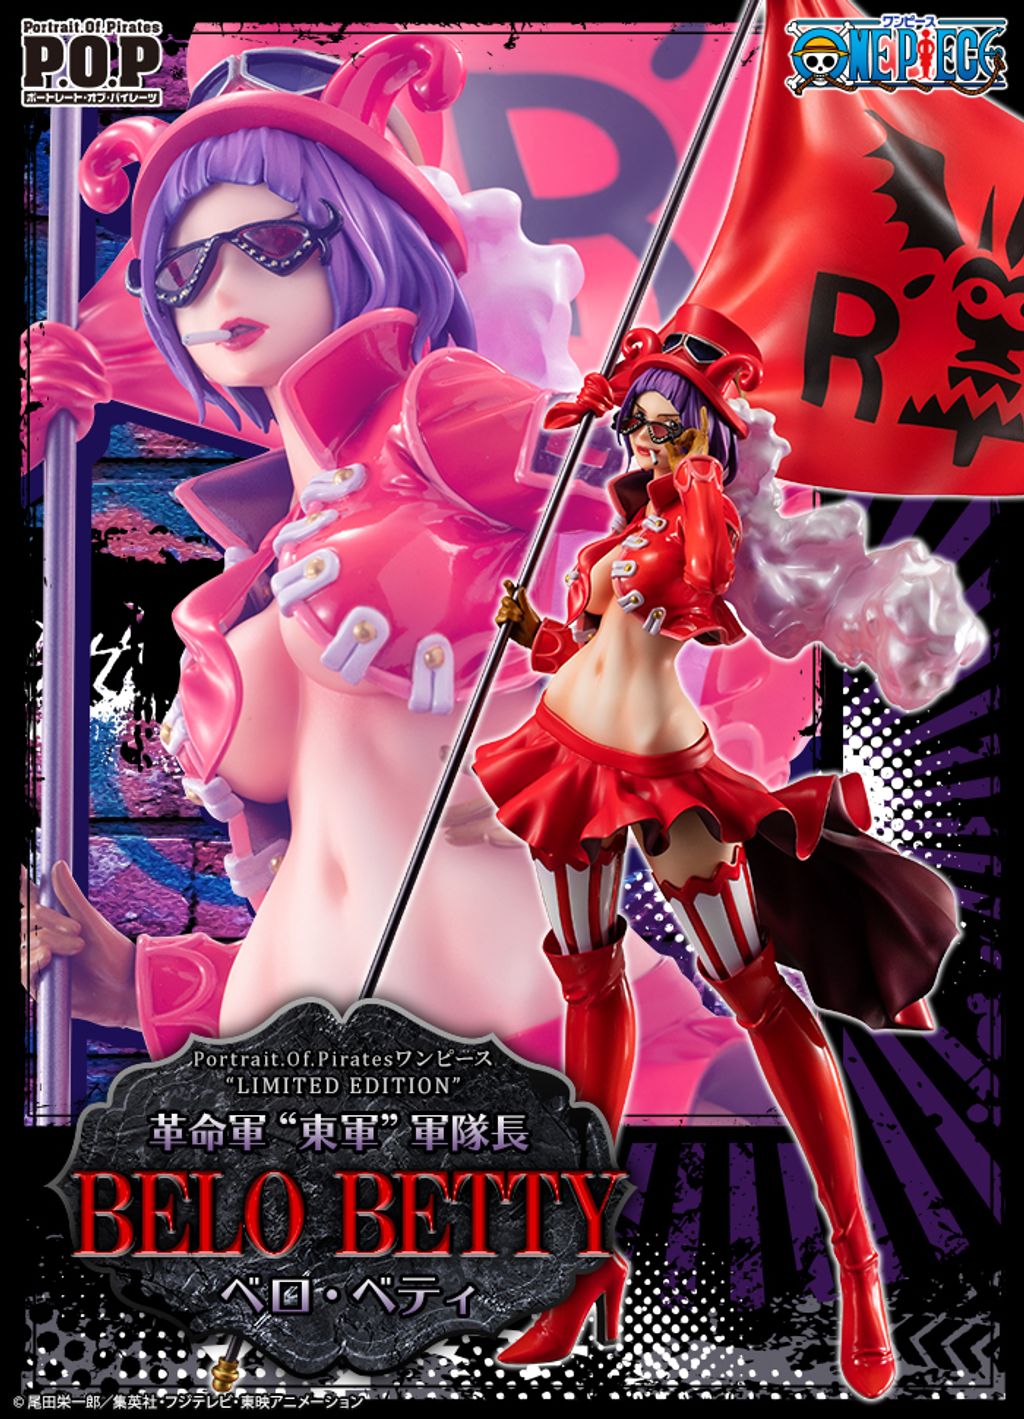 Portrait.Of.Pirates -LIMITED EDITION- ONE PIECE Belo Betty.jpg